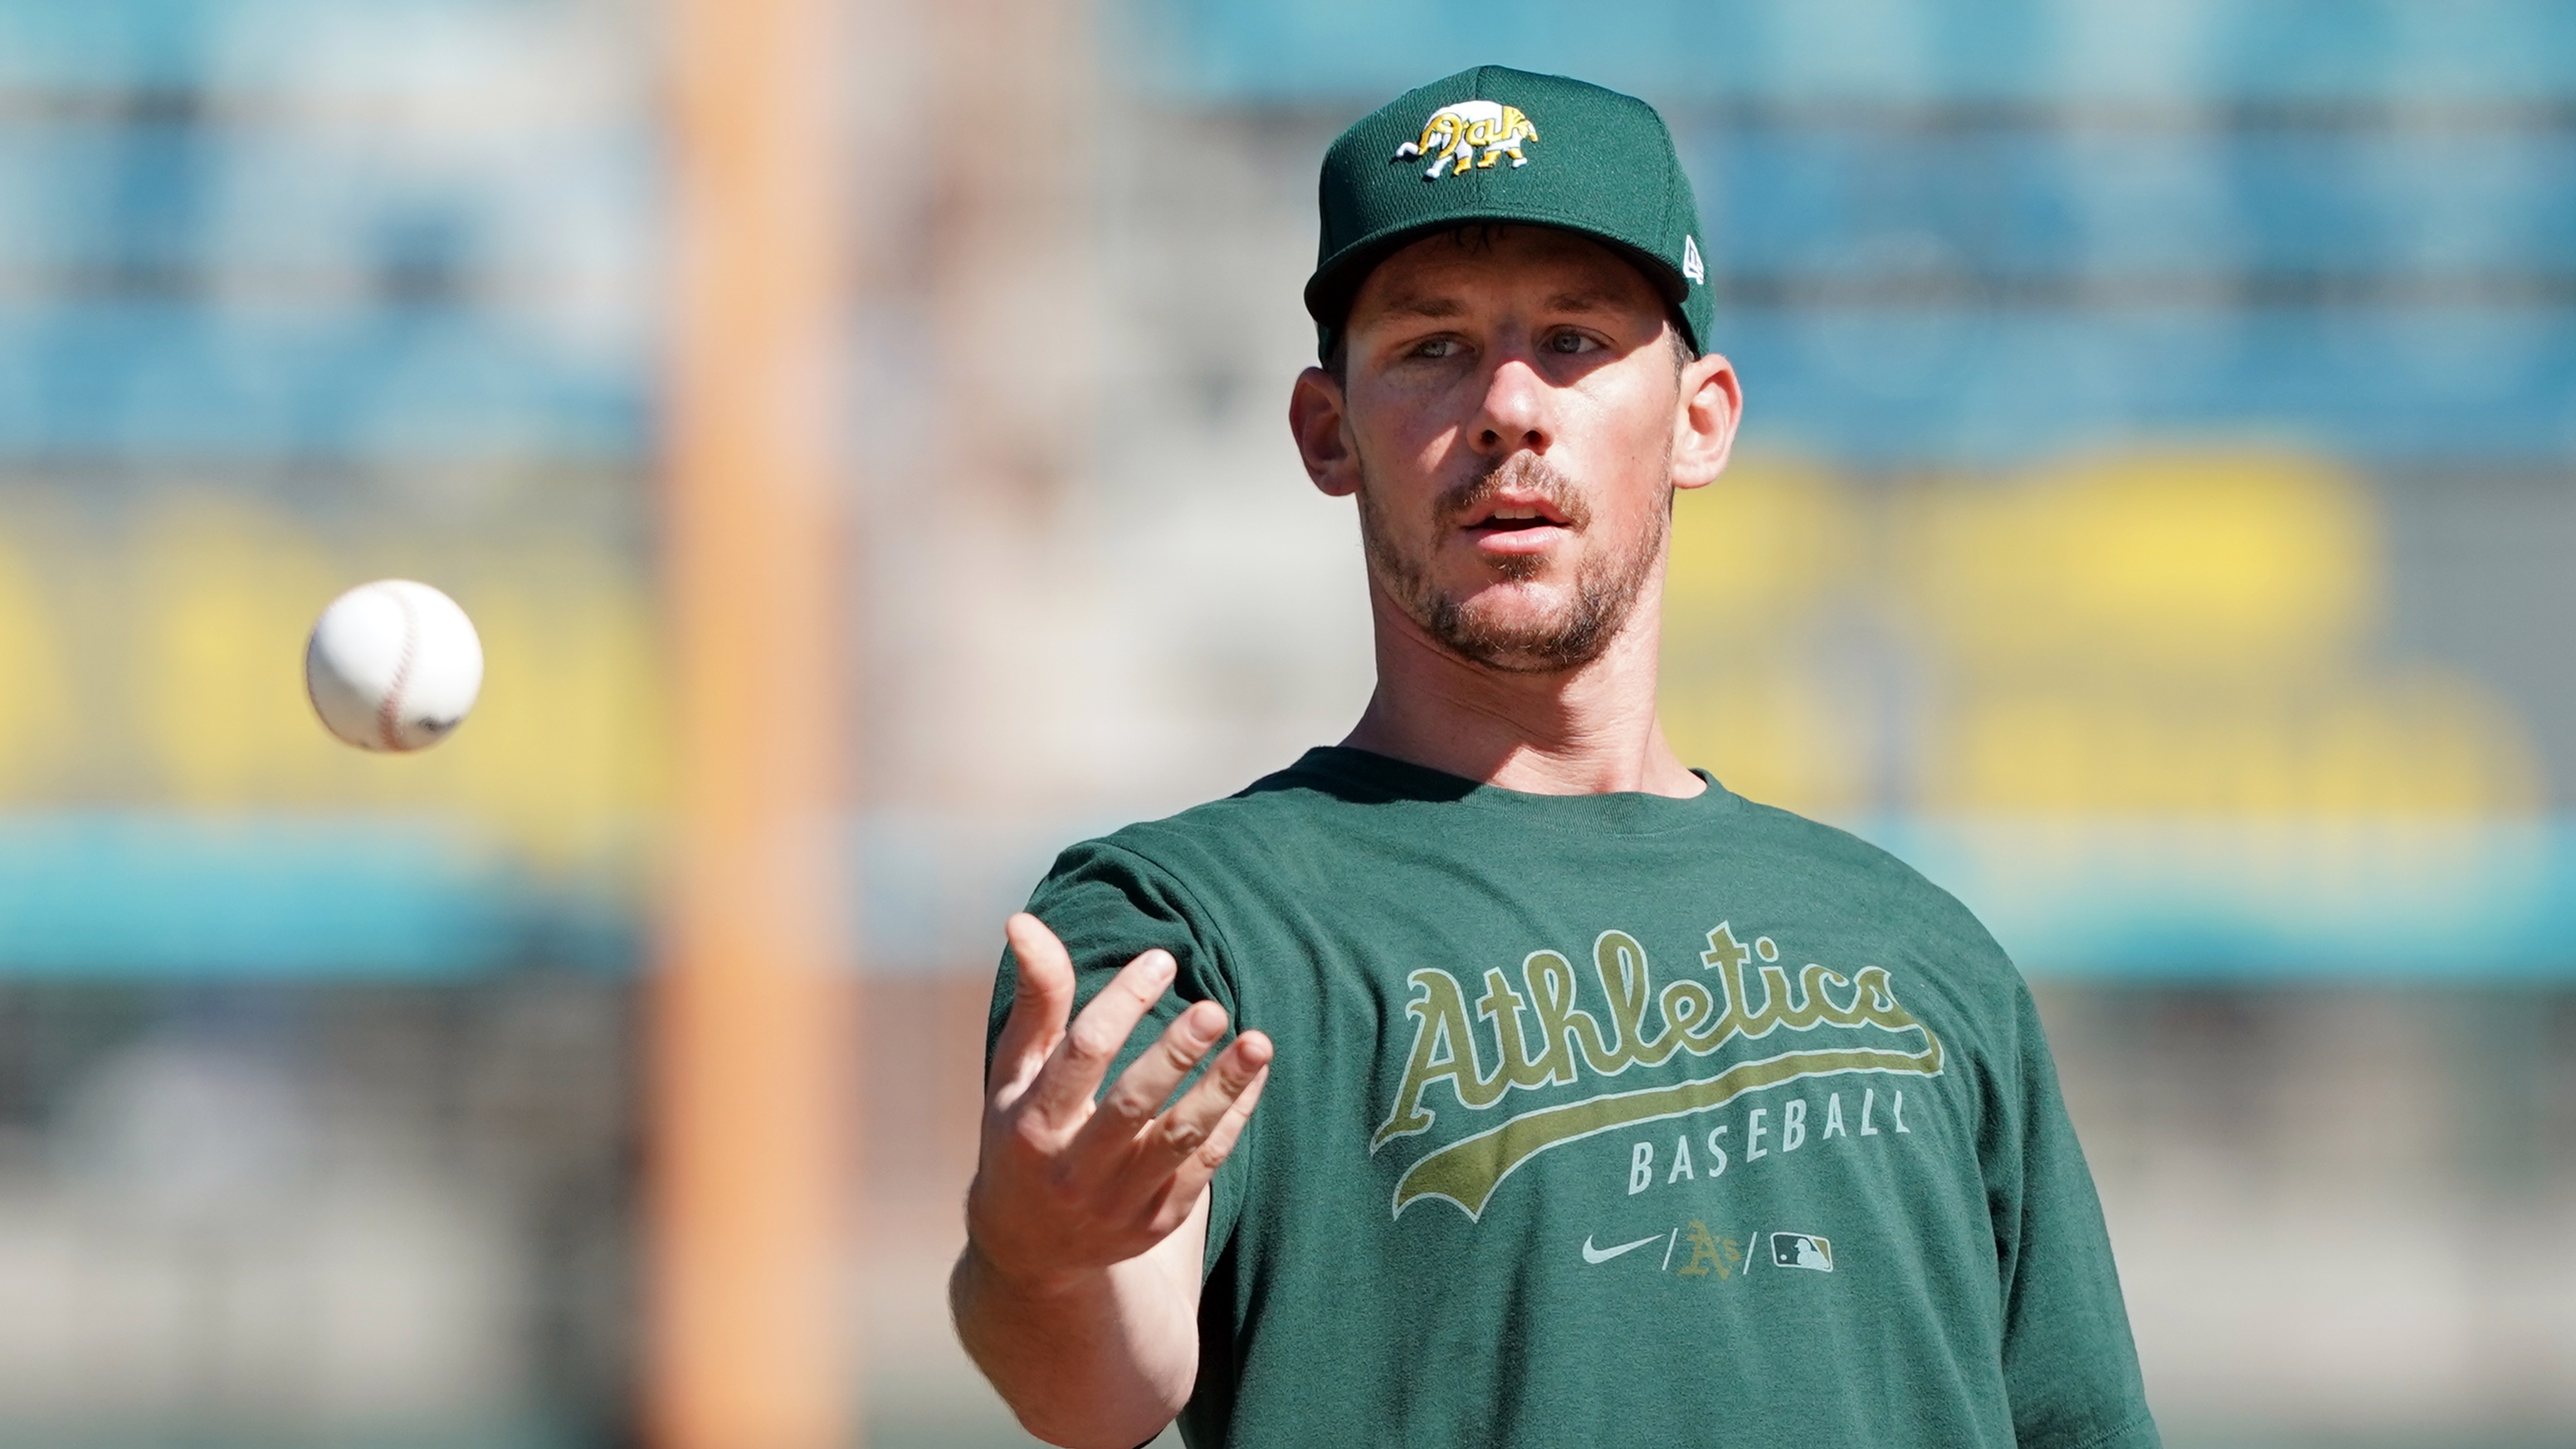 A's pitcher Chris Bassitt hit in head by line drive, carted off